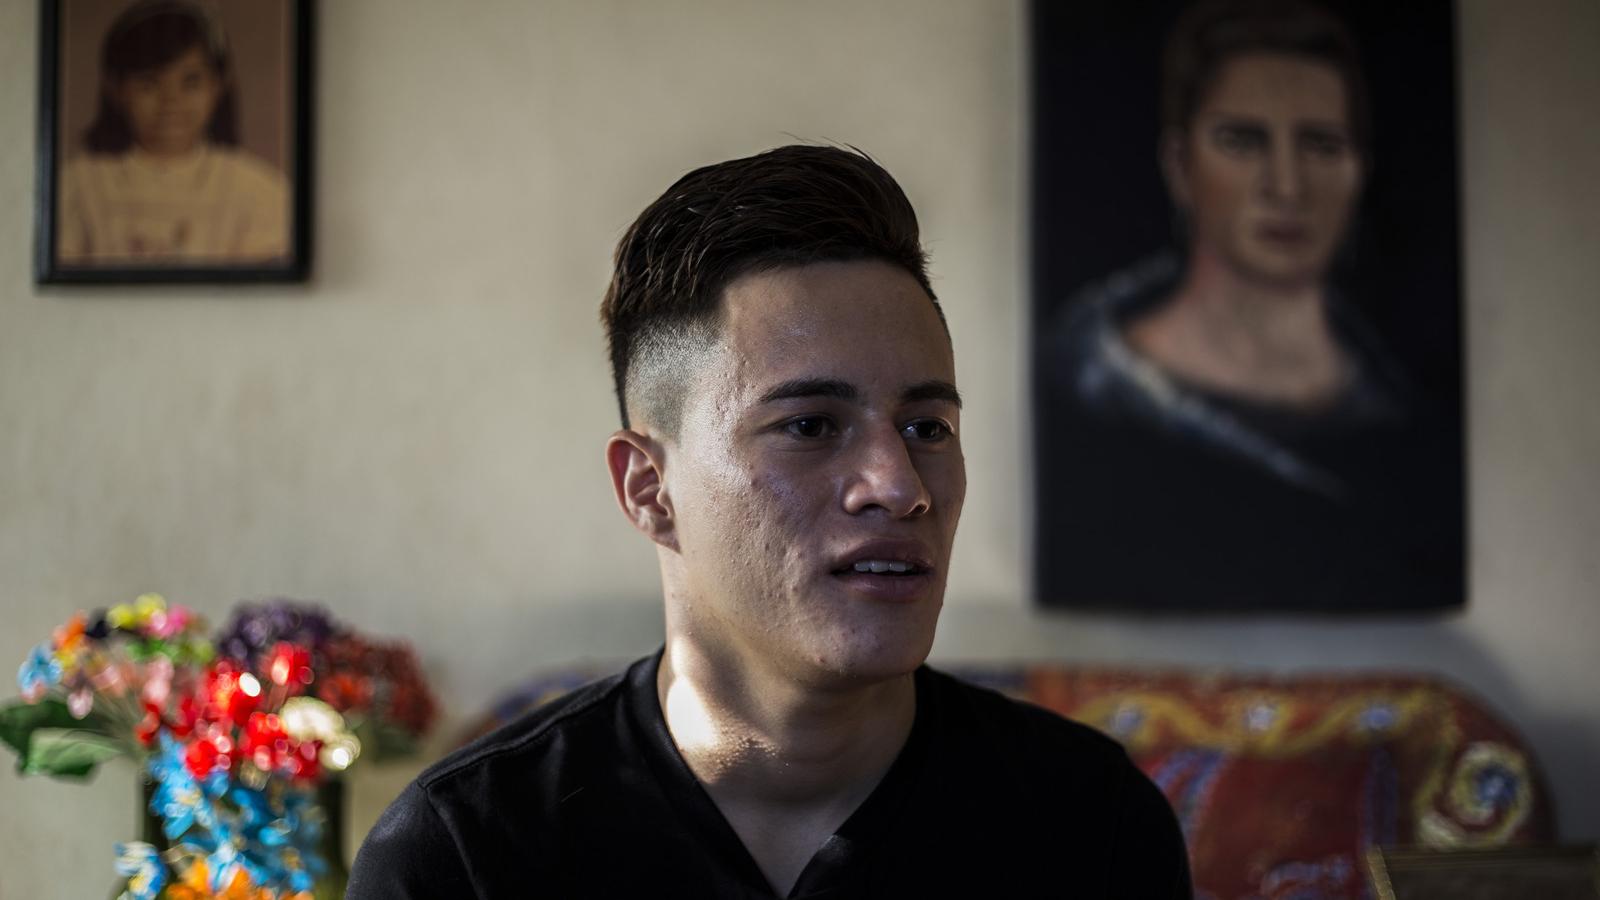 Daniel Alemán wears a black shirt in a room with two paintings on the wall and a blurry bouquet of flowers. 